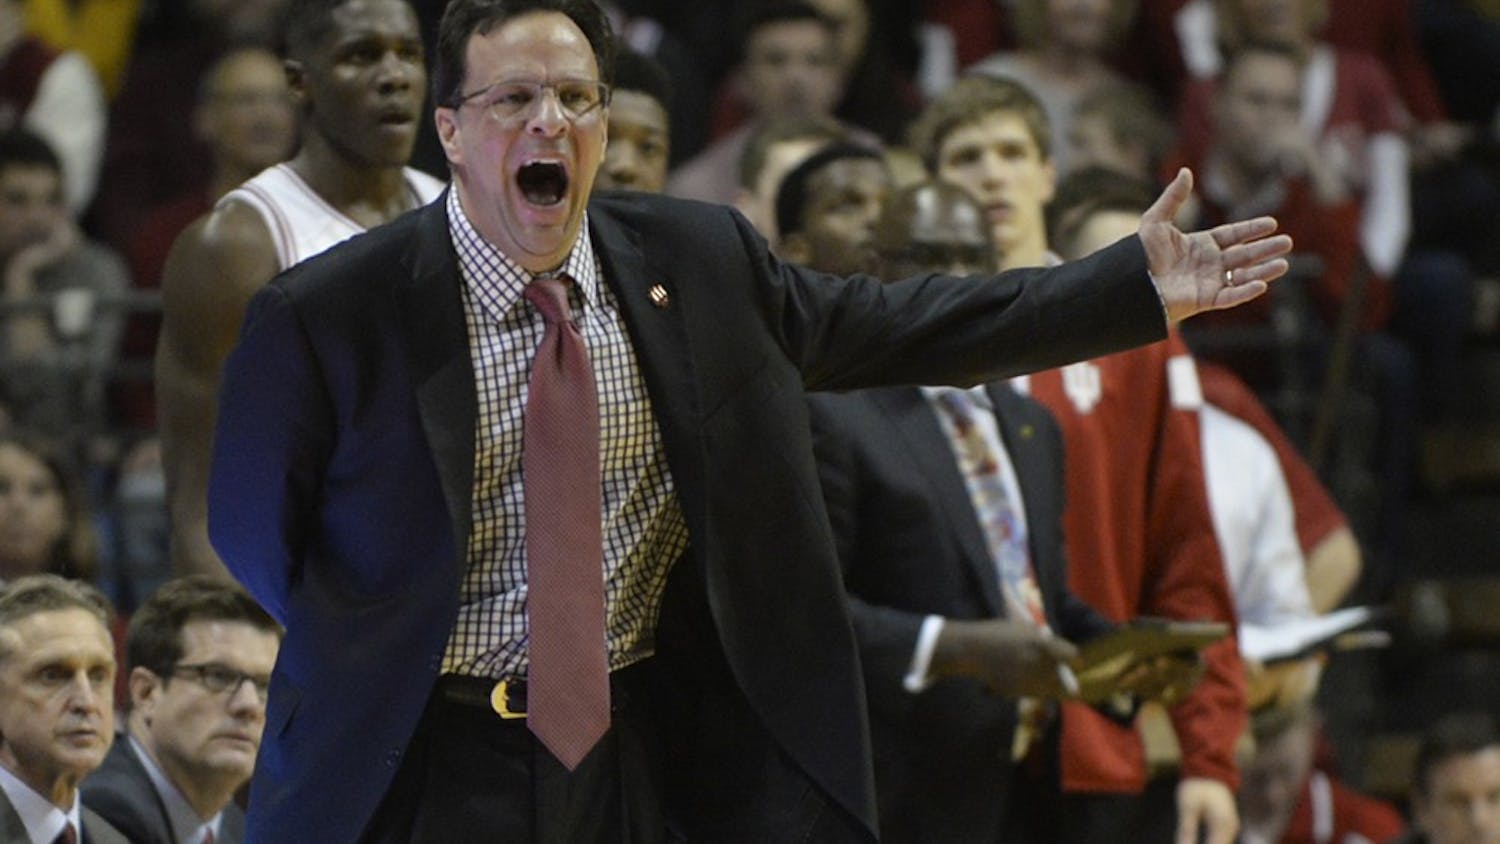 Coach Tom Crean questions a call during the game against Iowa on Tuesday evening at Assembly Hall. IU lost 77-63.